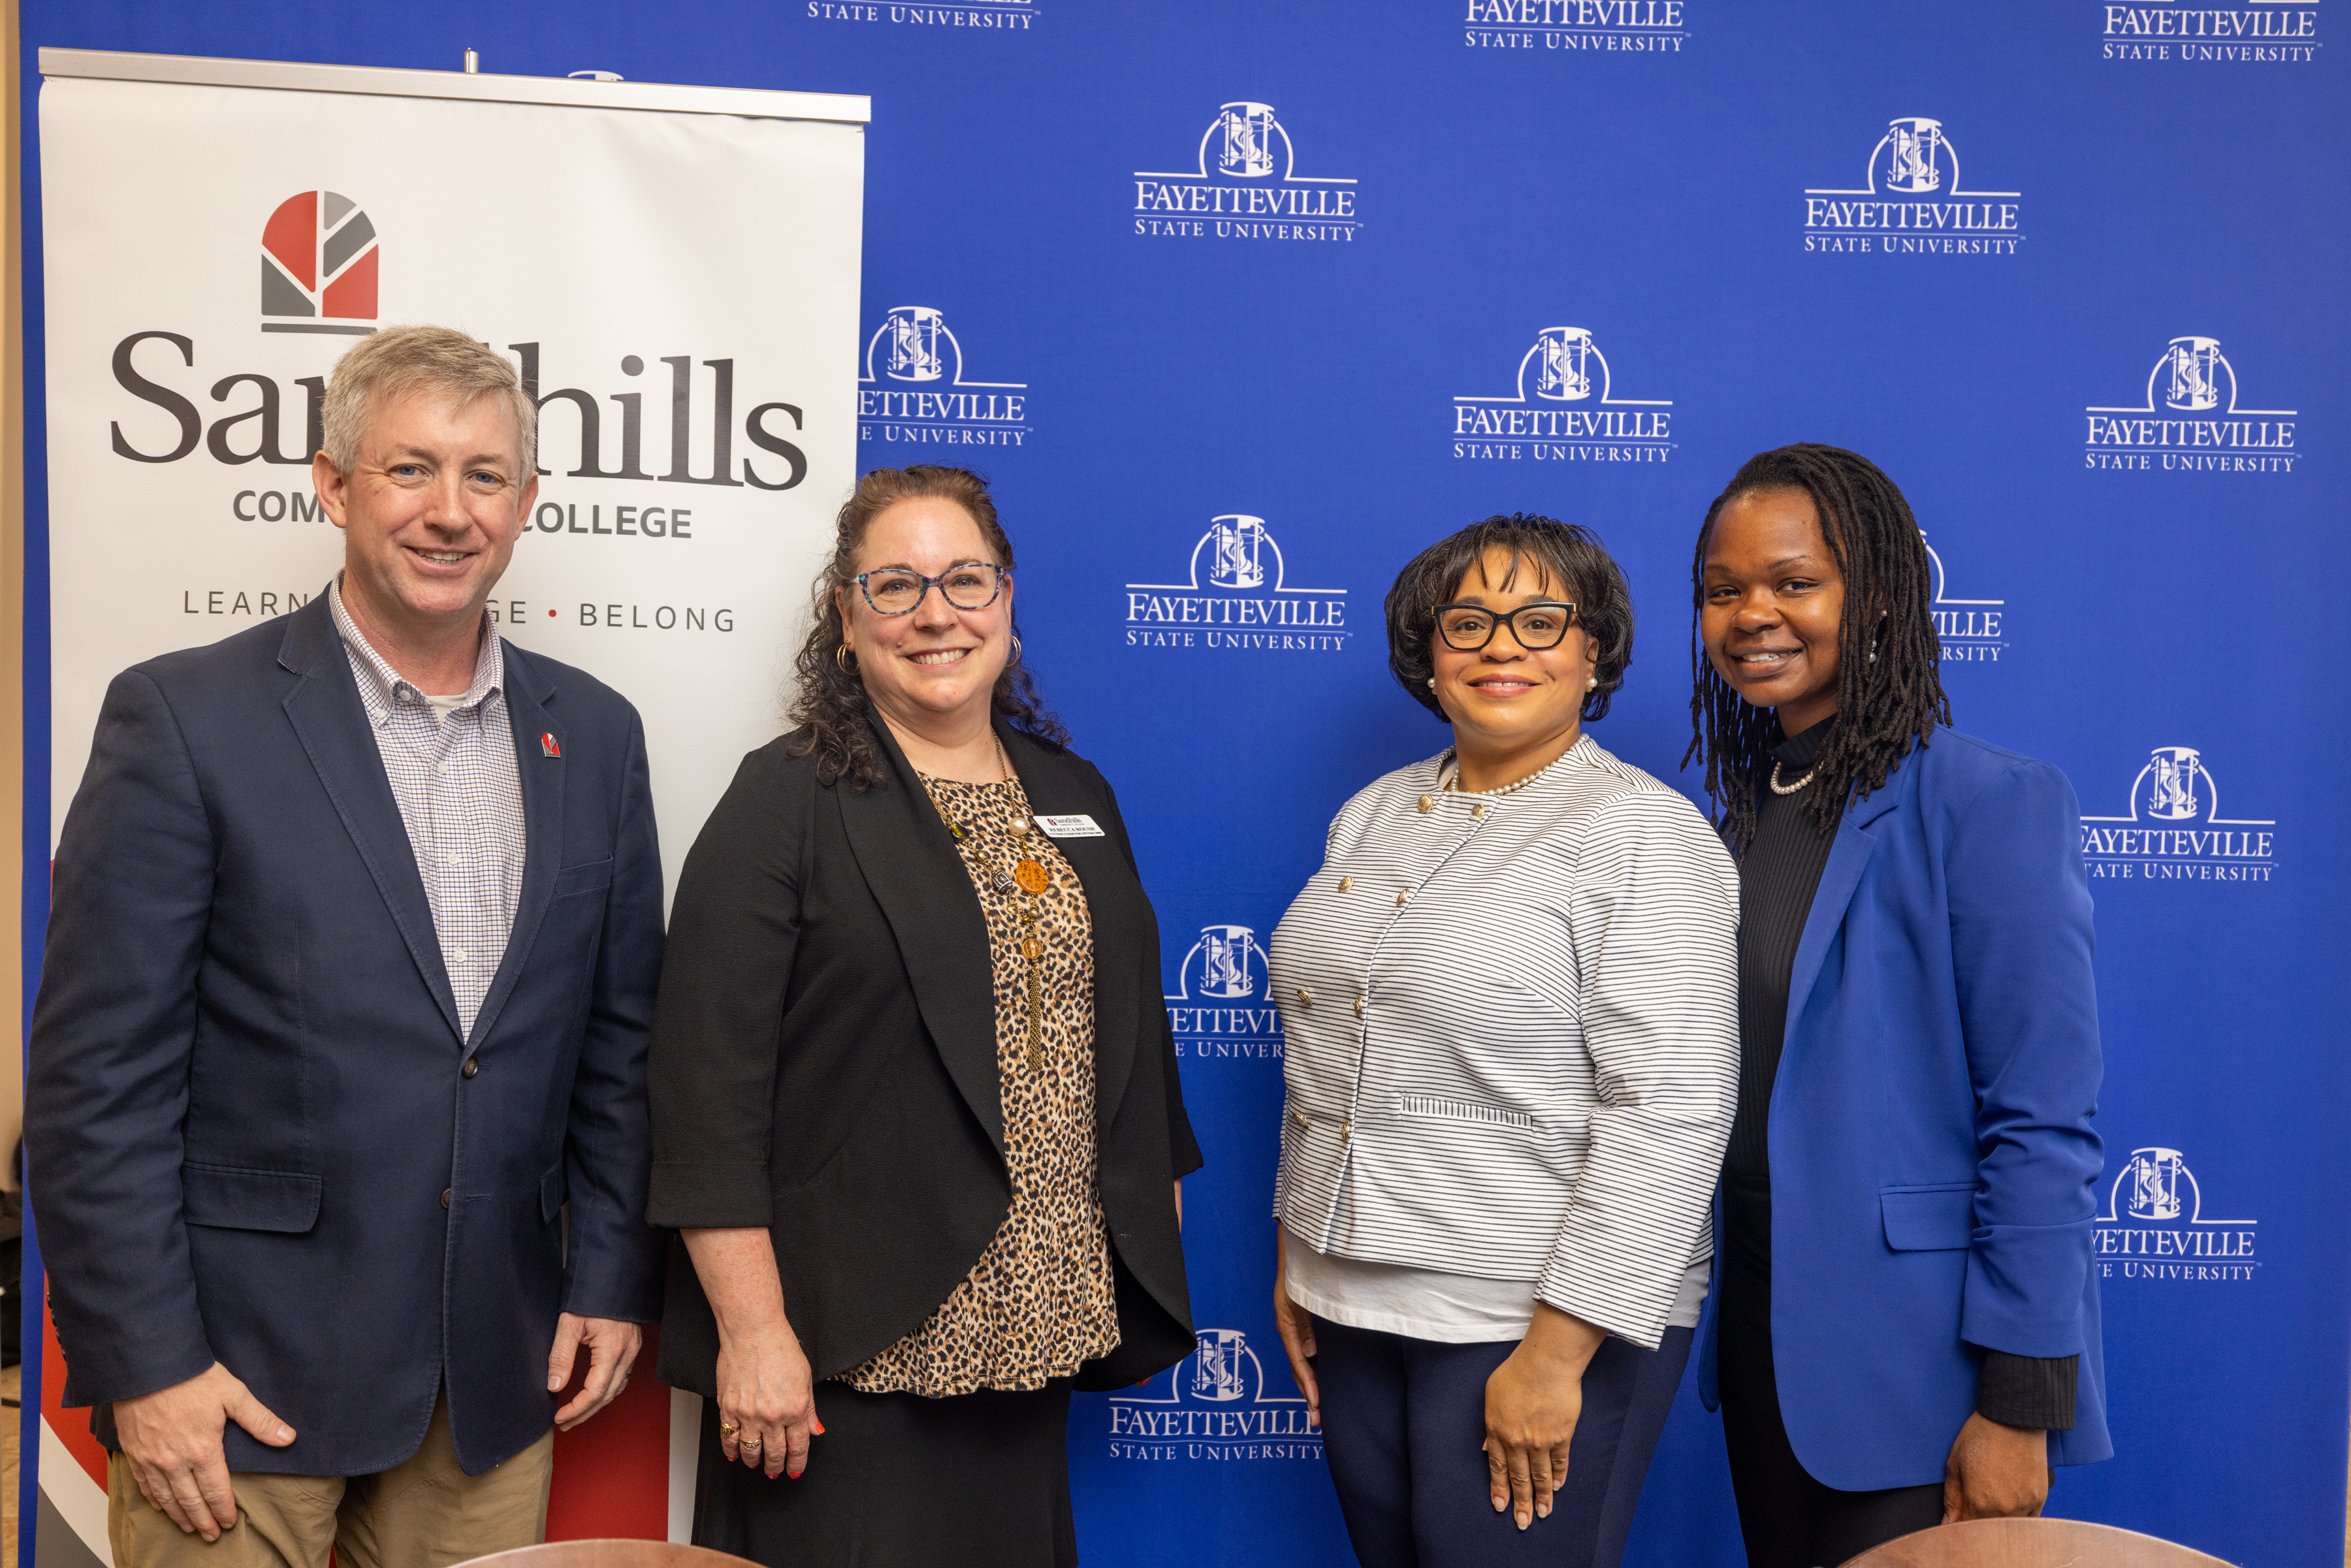 Dr. Sandy Stewart, SCC President; Dr. Rebecca Roush, SCC Senior Vice President; Dr. Sonja Brown FSU Associate Vice Chancellor; and Dr. Cierra Griffin, FSU Executive Director of the Office of Adult Learners, Transfer and Military Students